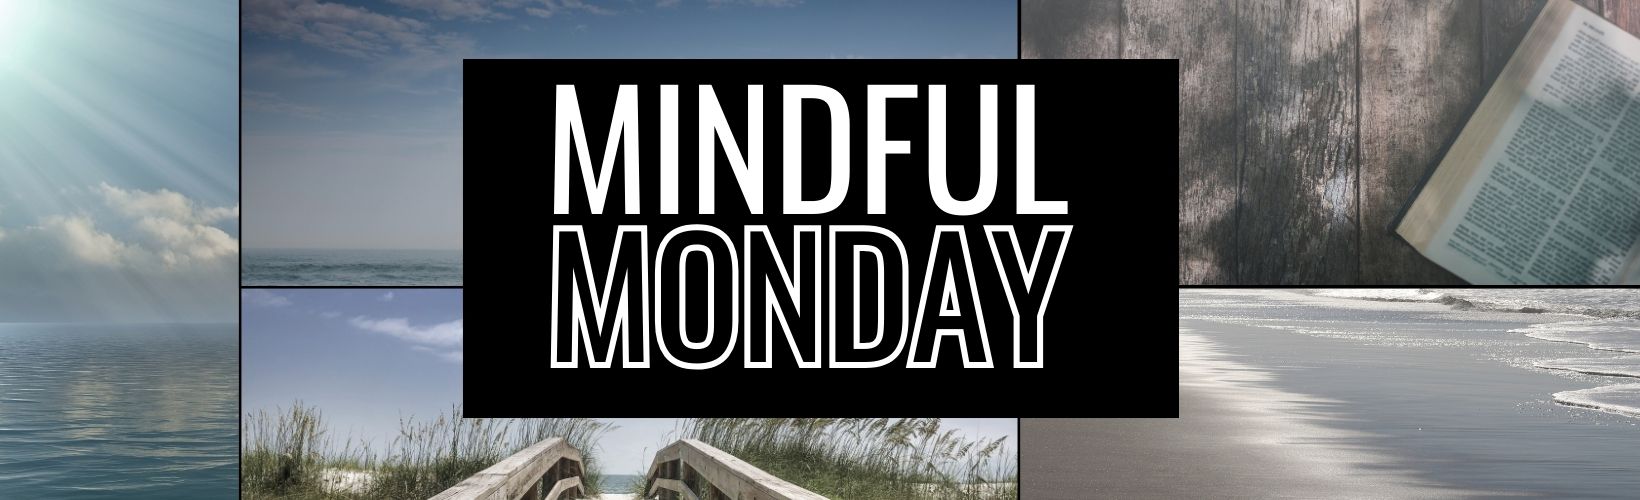 Mindful Monday: How to Cultivate a Kind Heart, a Fierce Mind, and a Brave Spirit